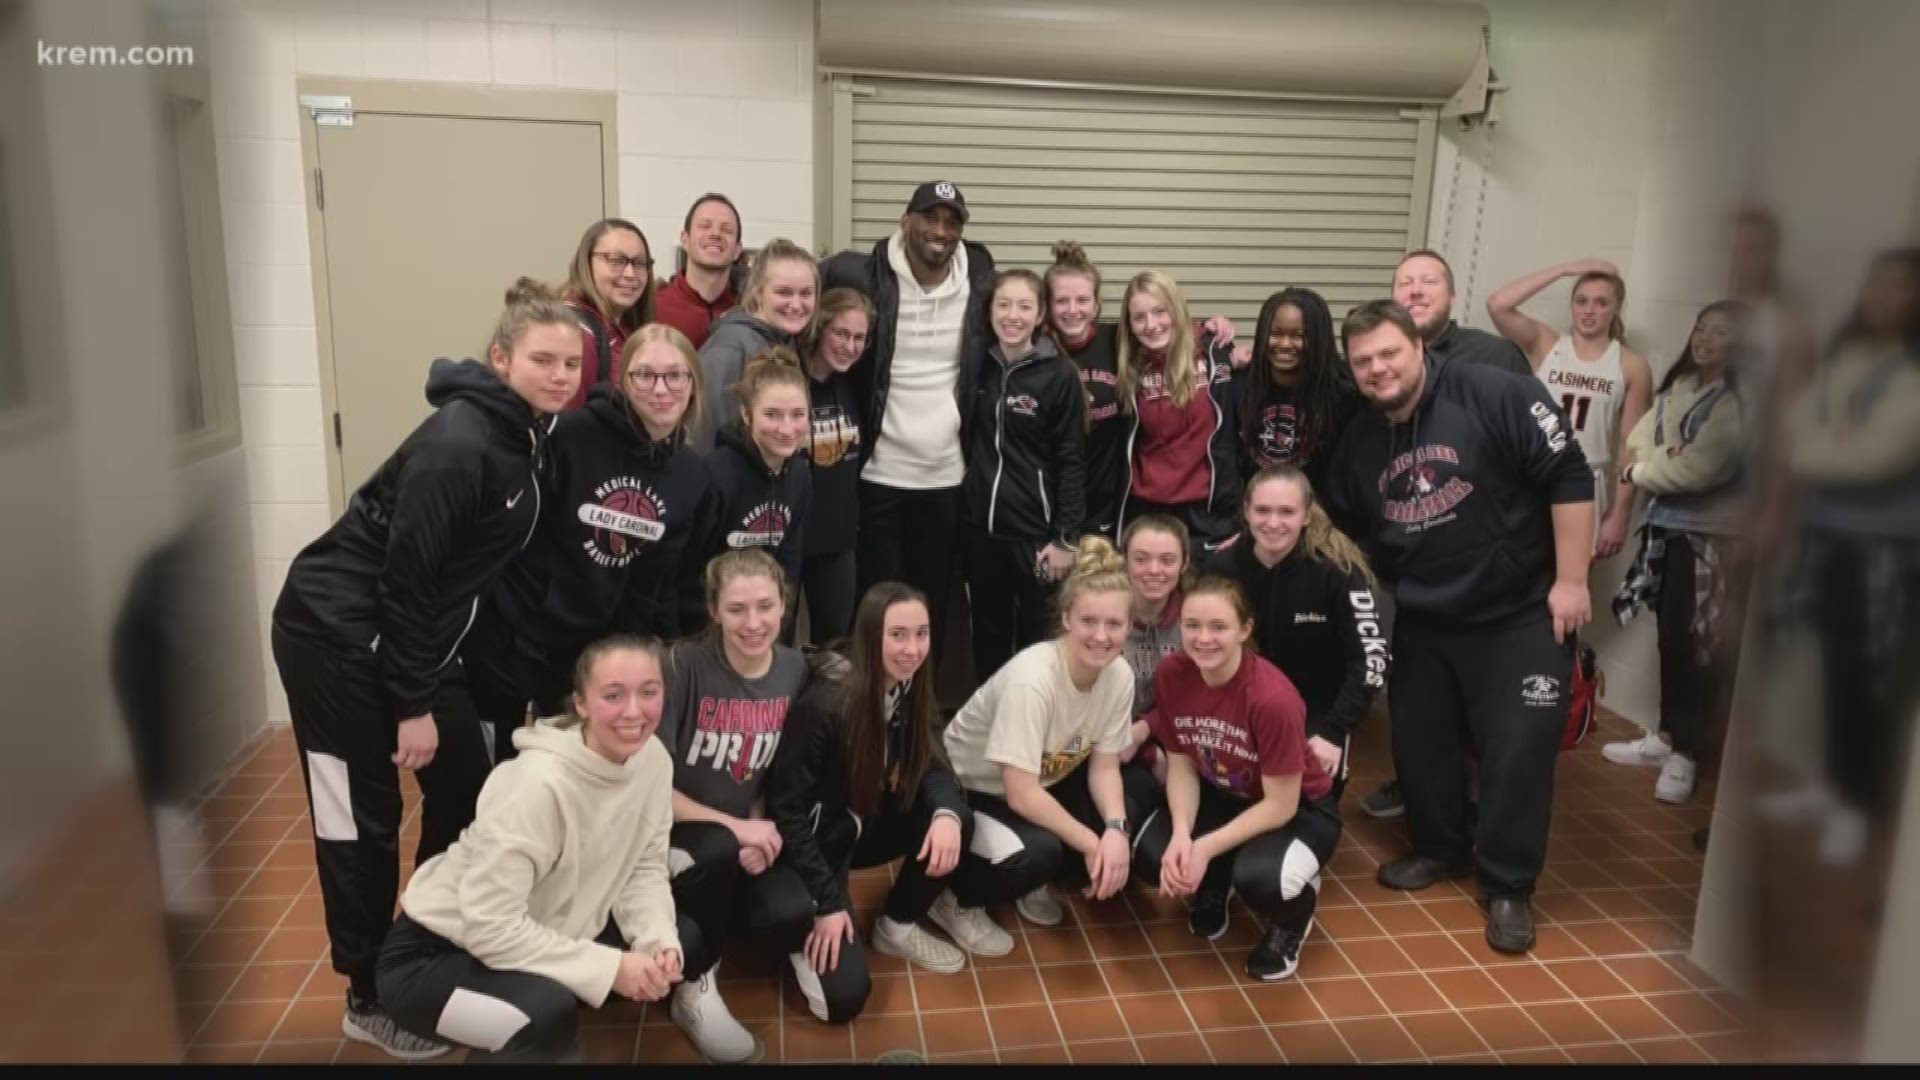 Kobe Bryant and his daughter Gianna attended a girl's basketball game in Cashmere to watch Hailey van Lith play Medical Lake.